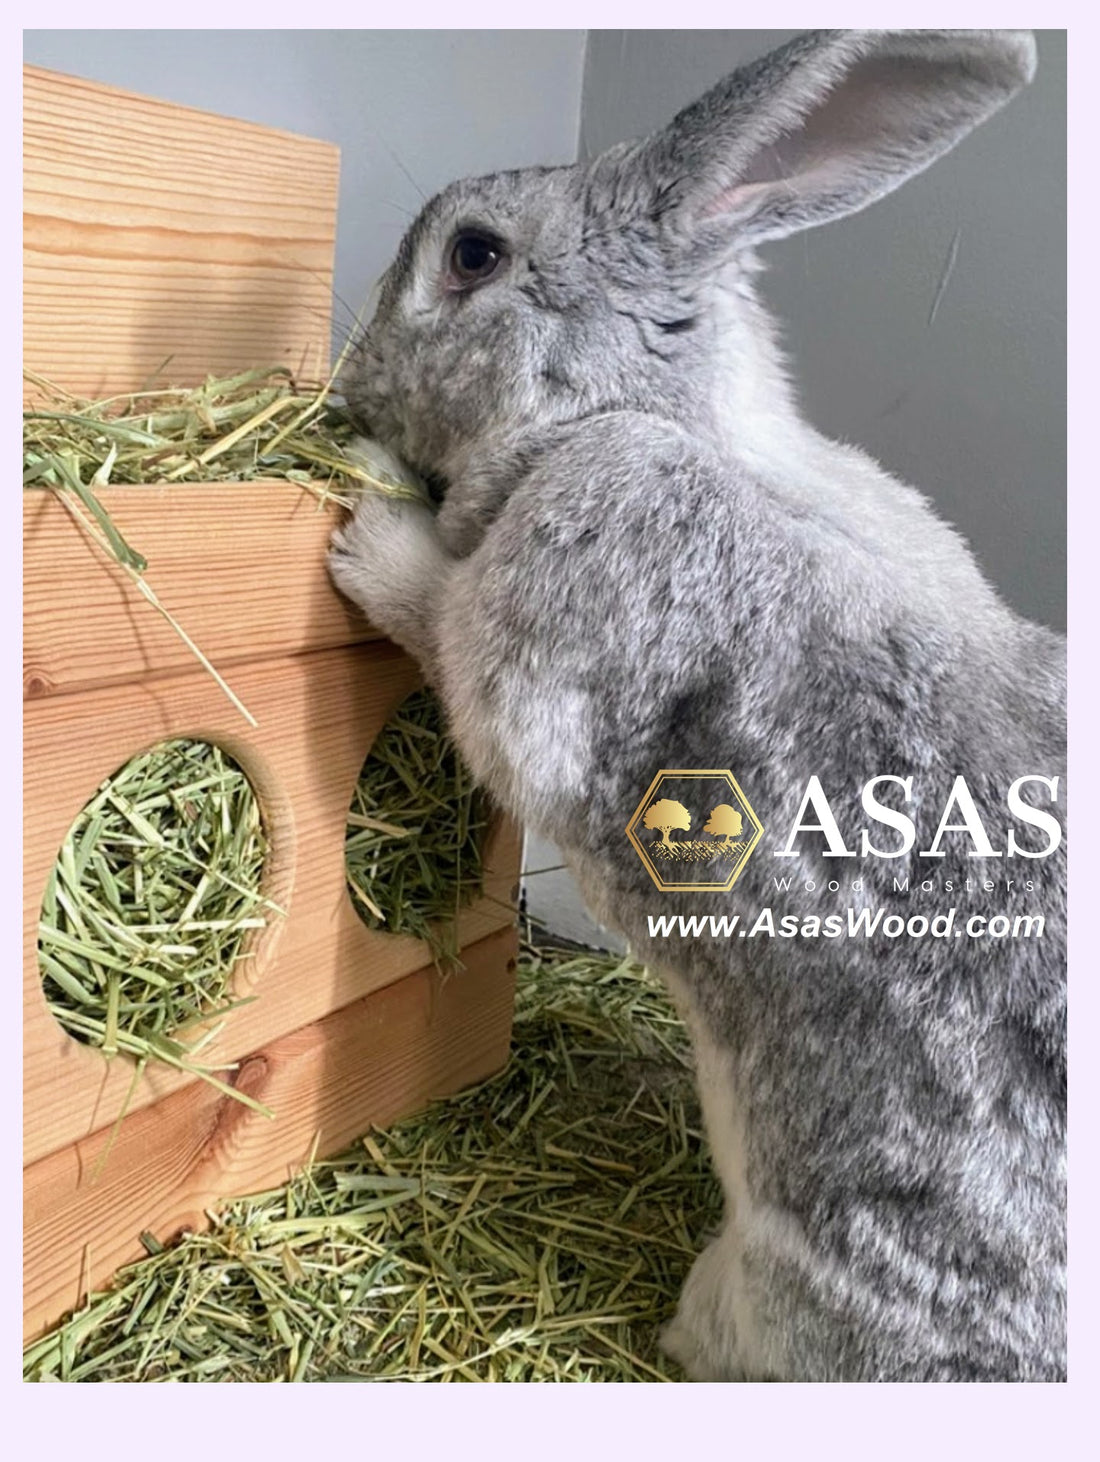 Rabbit rescue center support asaswood